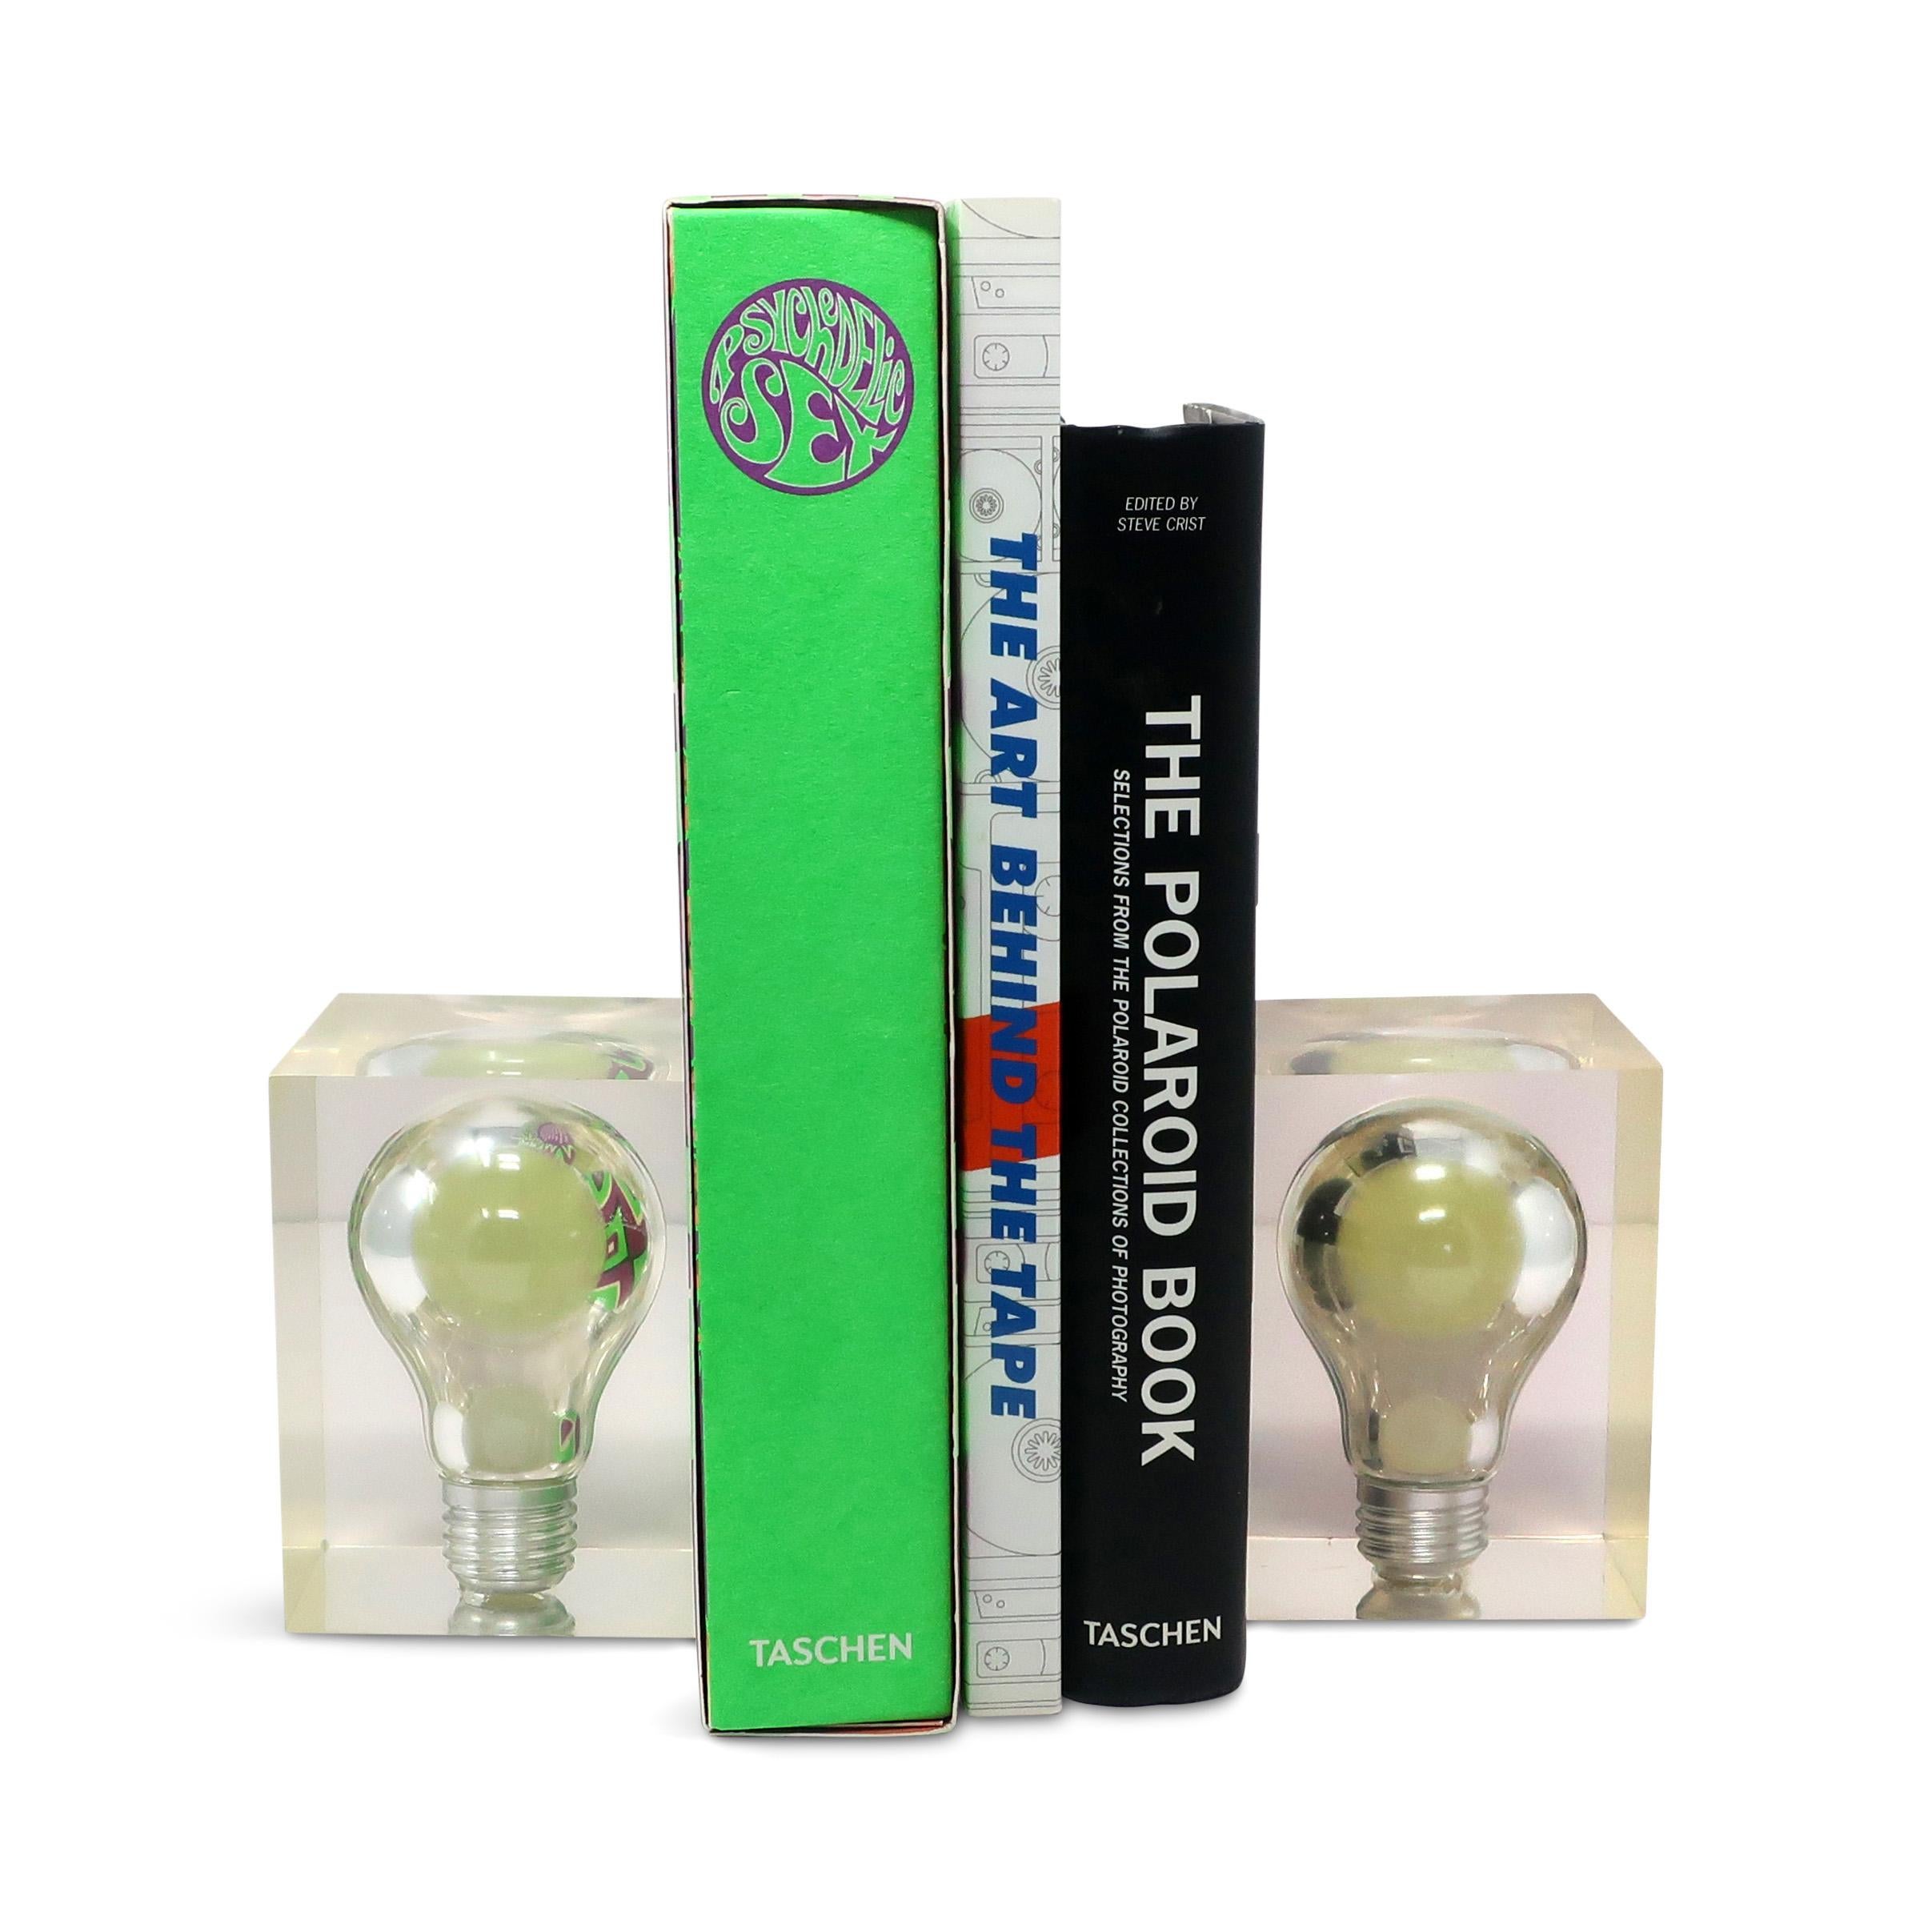 A striking and whimsical pair of bookends with lightbulbs filled with a phosphorescent (glow in the dark) substance suspended in a lucite cube.  The pair was designed by Pierre Giraudon, an artist and designer known for suspending items in lucite in